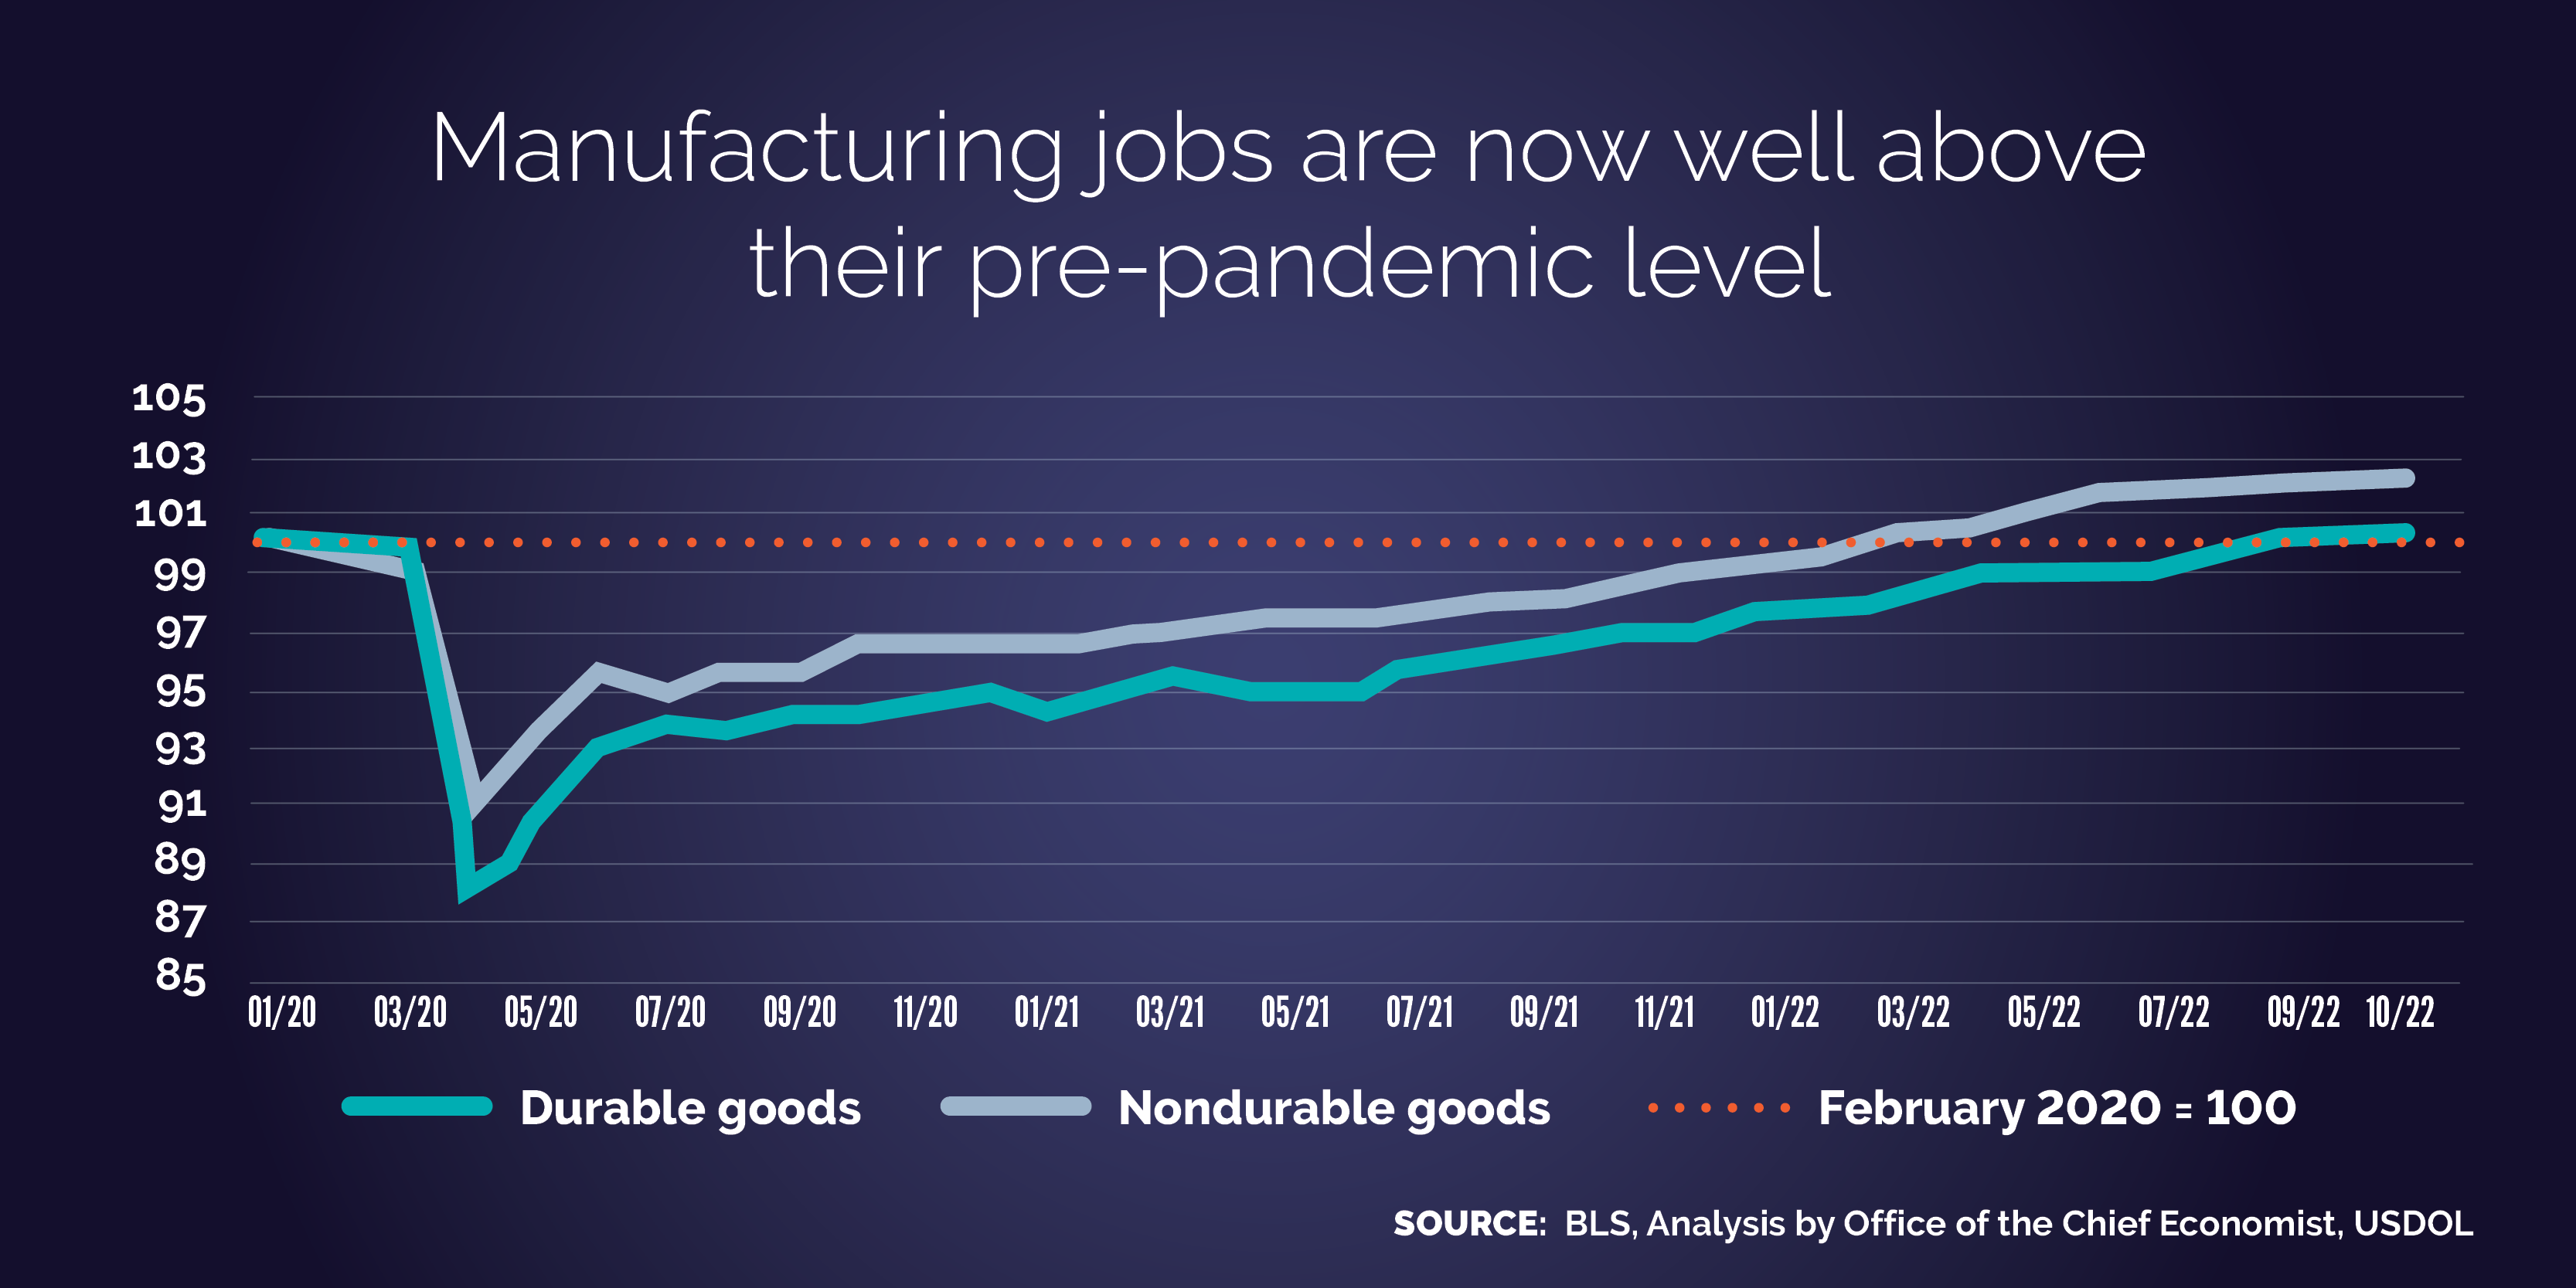 Chart showing the initial loss of manufacturing jobs from January through April 2020, and then steady growth from May 2020 though October 2022. In early 2022, the number of nondurable goods manufacturing jobs surpassed the pre-pandemic level. In October 2022, the number of durable goods manufacturing jobs surpassed the pre-pandemic level, as well.